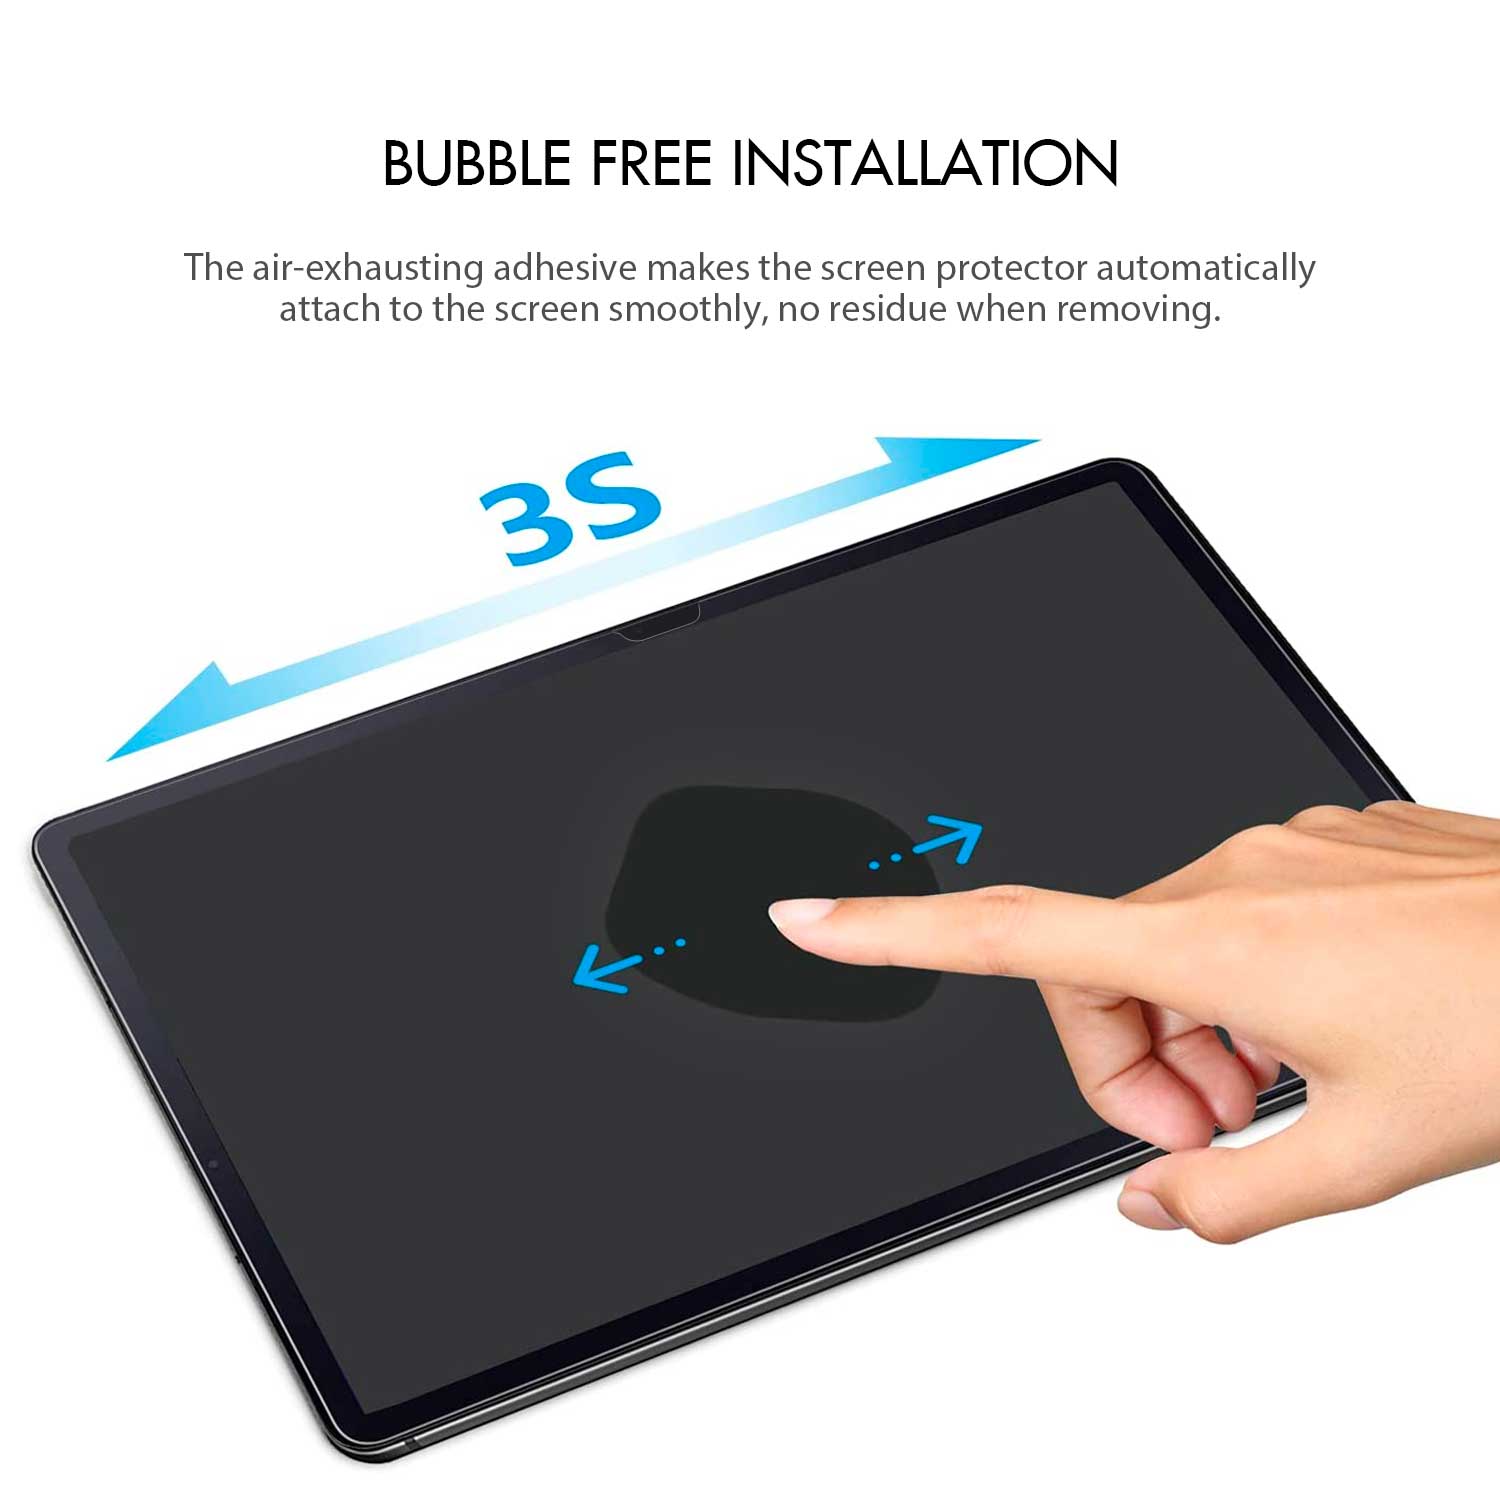 Tough On Samsung Galaxy Tab S8 Ultra Premium Tempered Glass Screen Protector